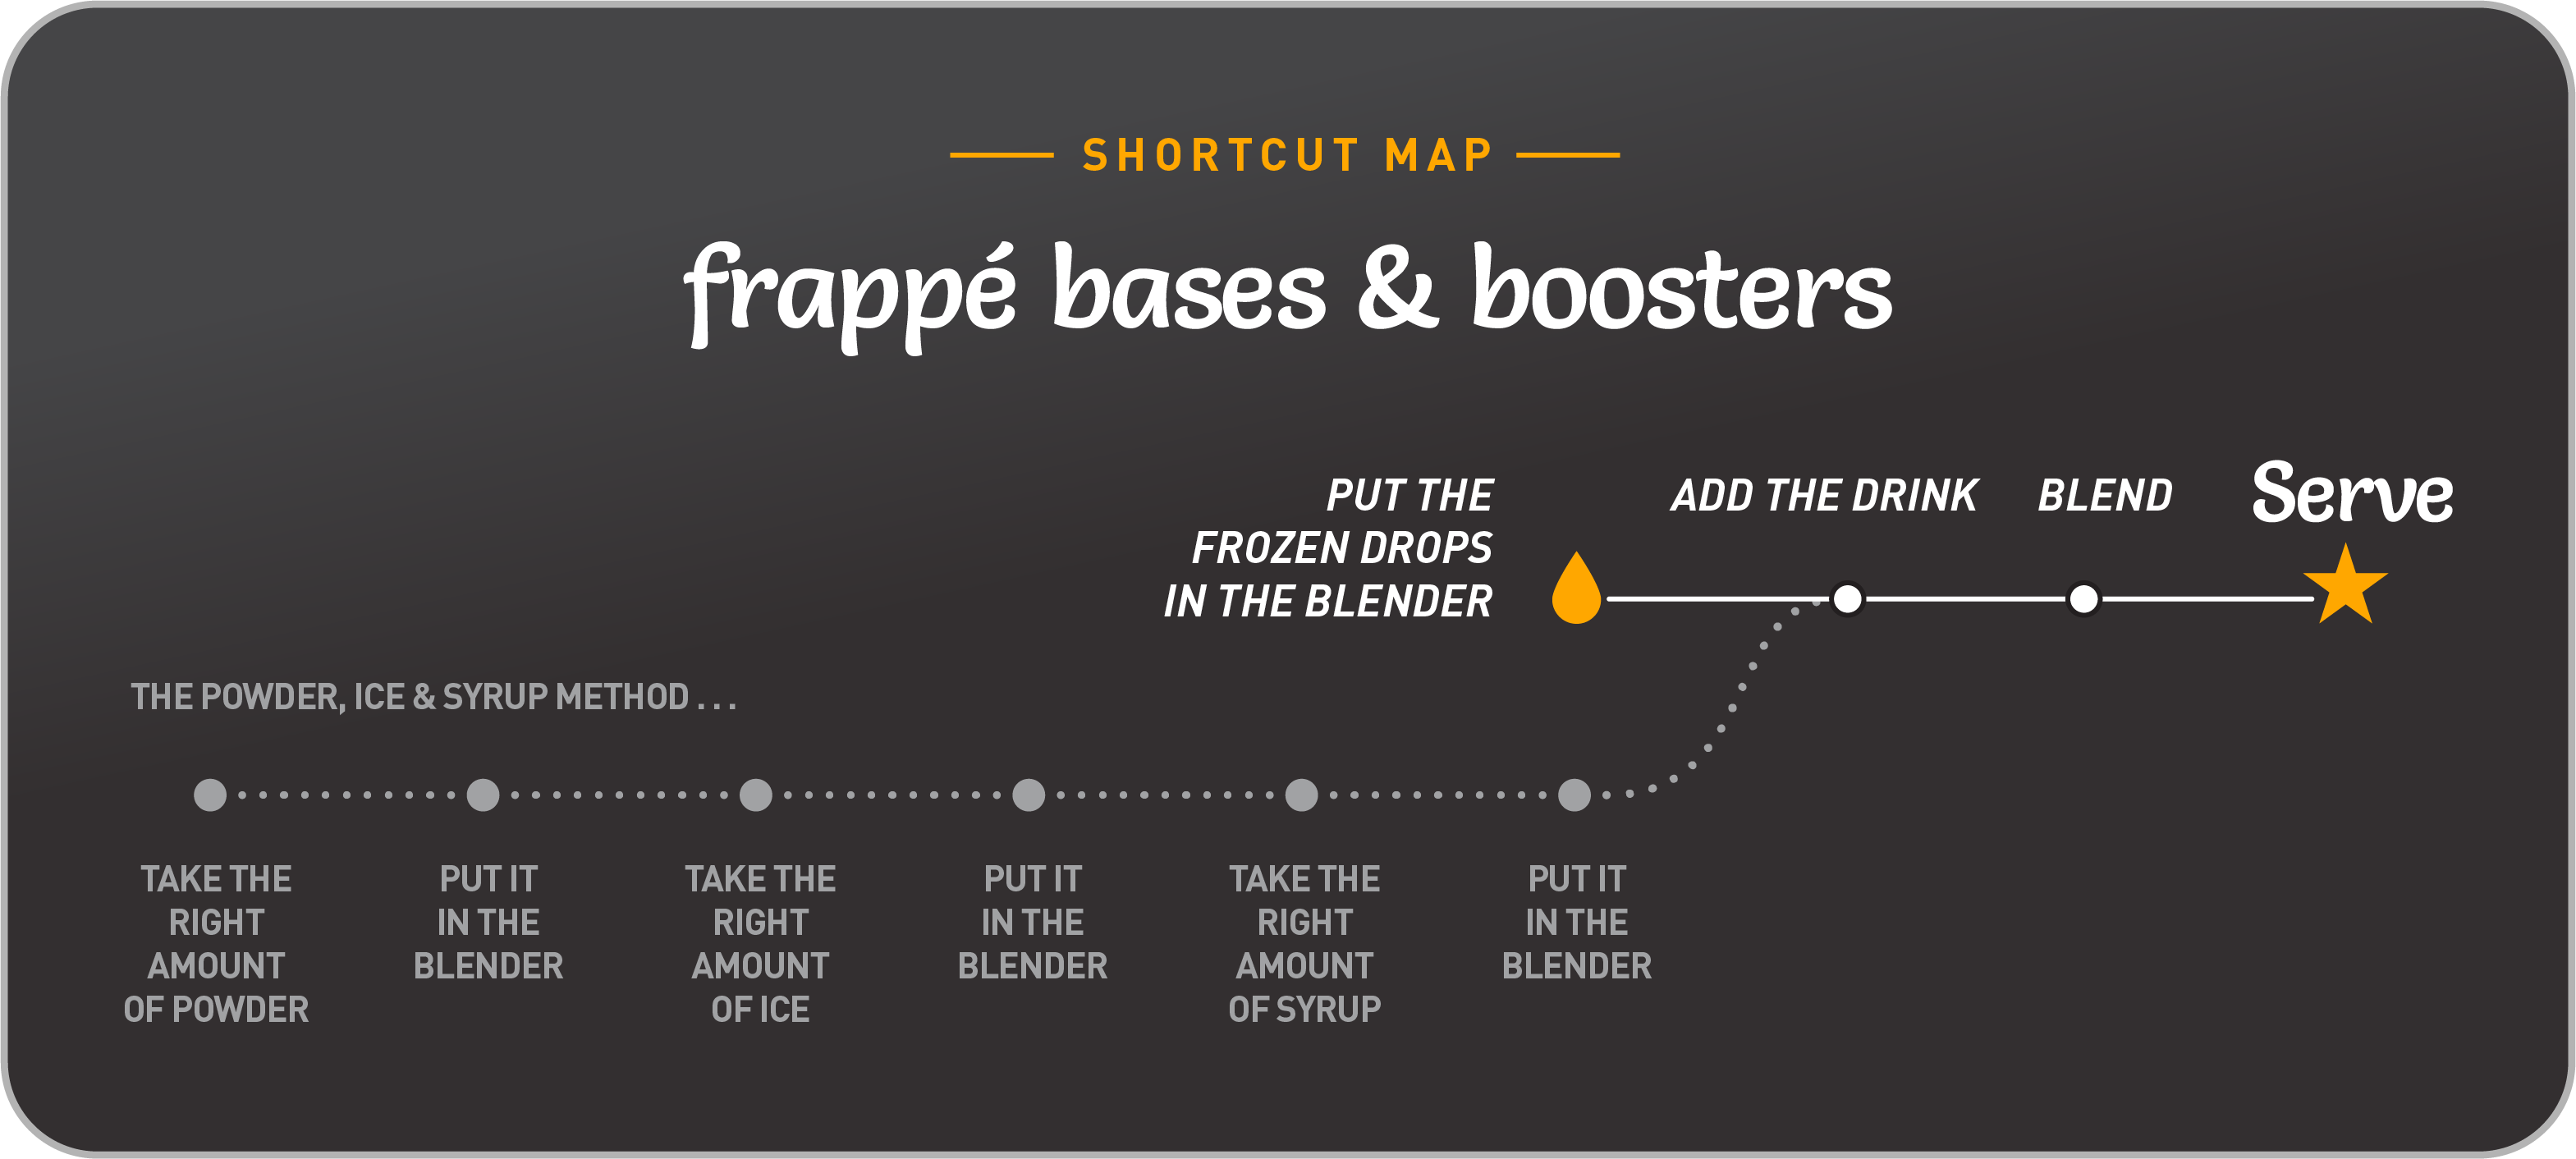 shortcut-map-frappe-bases-boosters